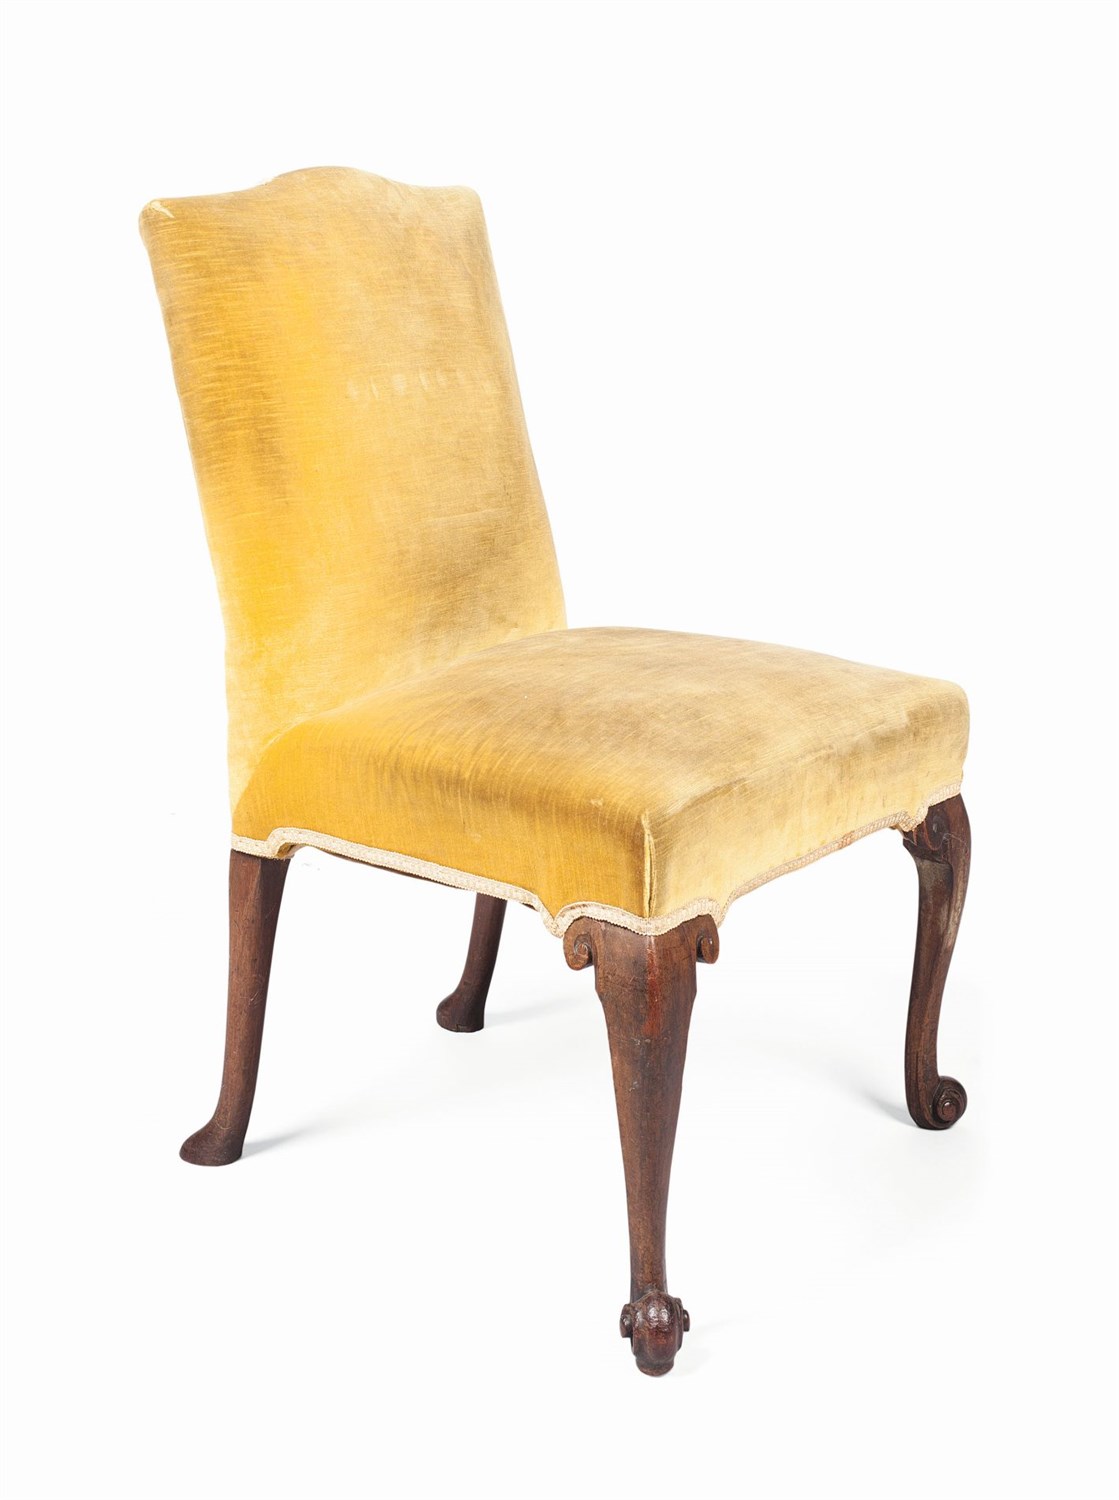 Lot 57 - GEORGE II MAHOGANY AND UPHOLSTERED SIDE CHAIR